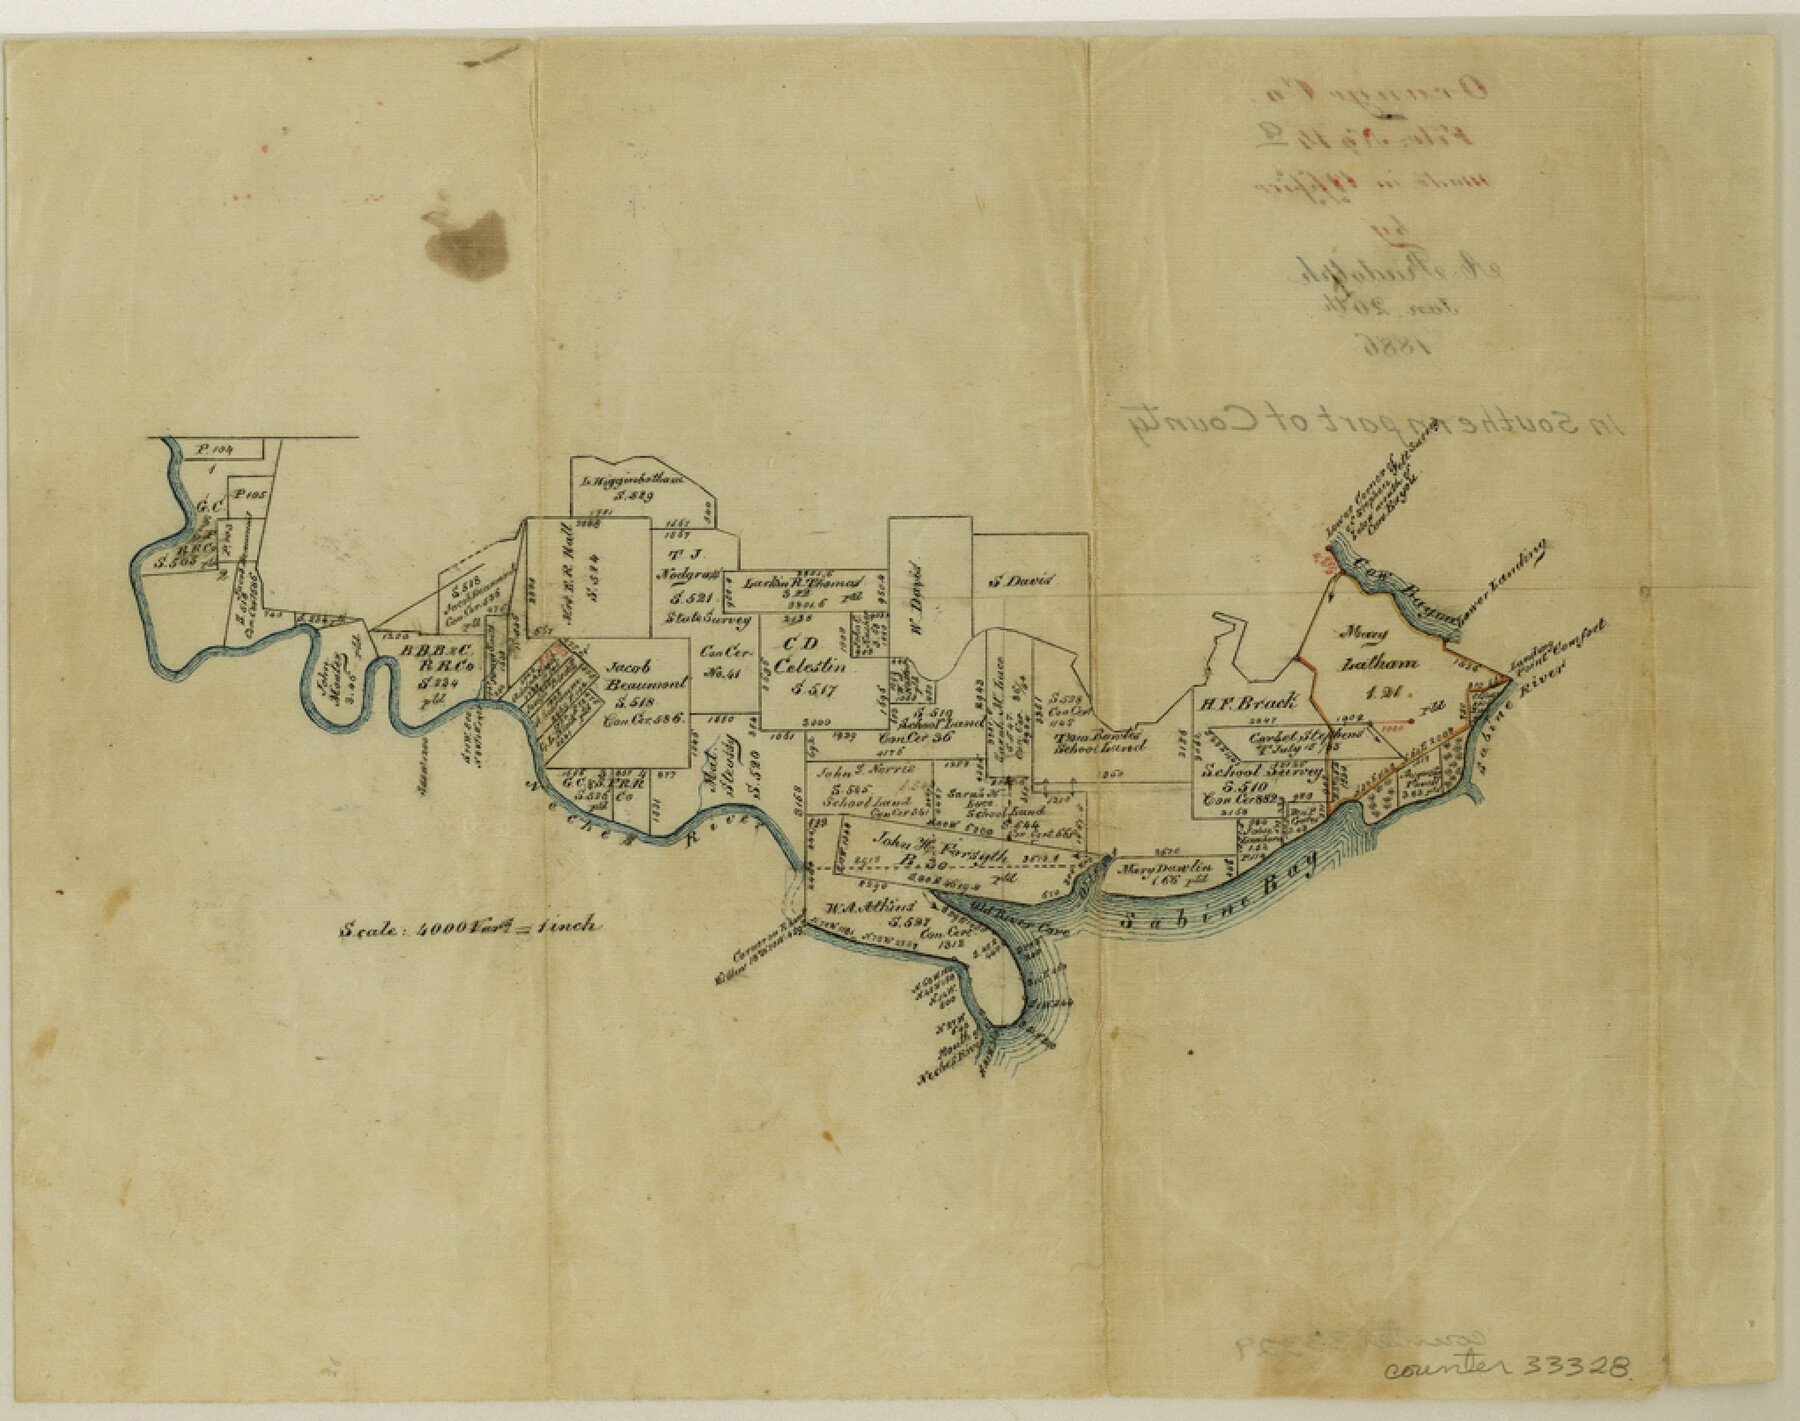 33328, Orange County Sketch File 14a, General Map Collection